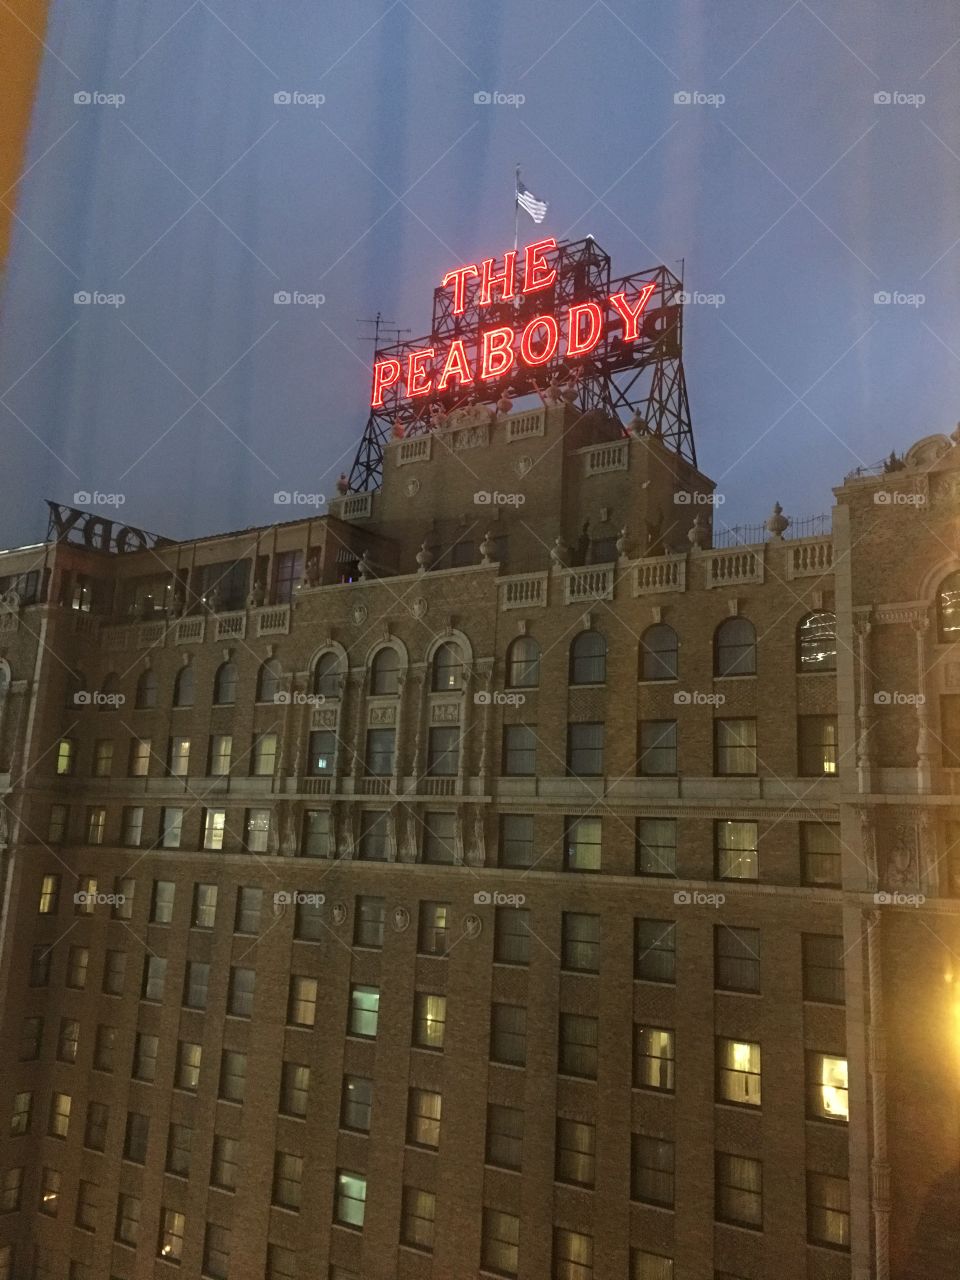 View of the Peabody hotel in Memphis, TN on a rainy evening